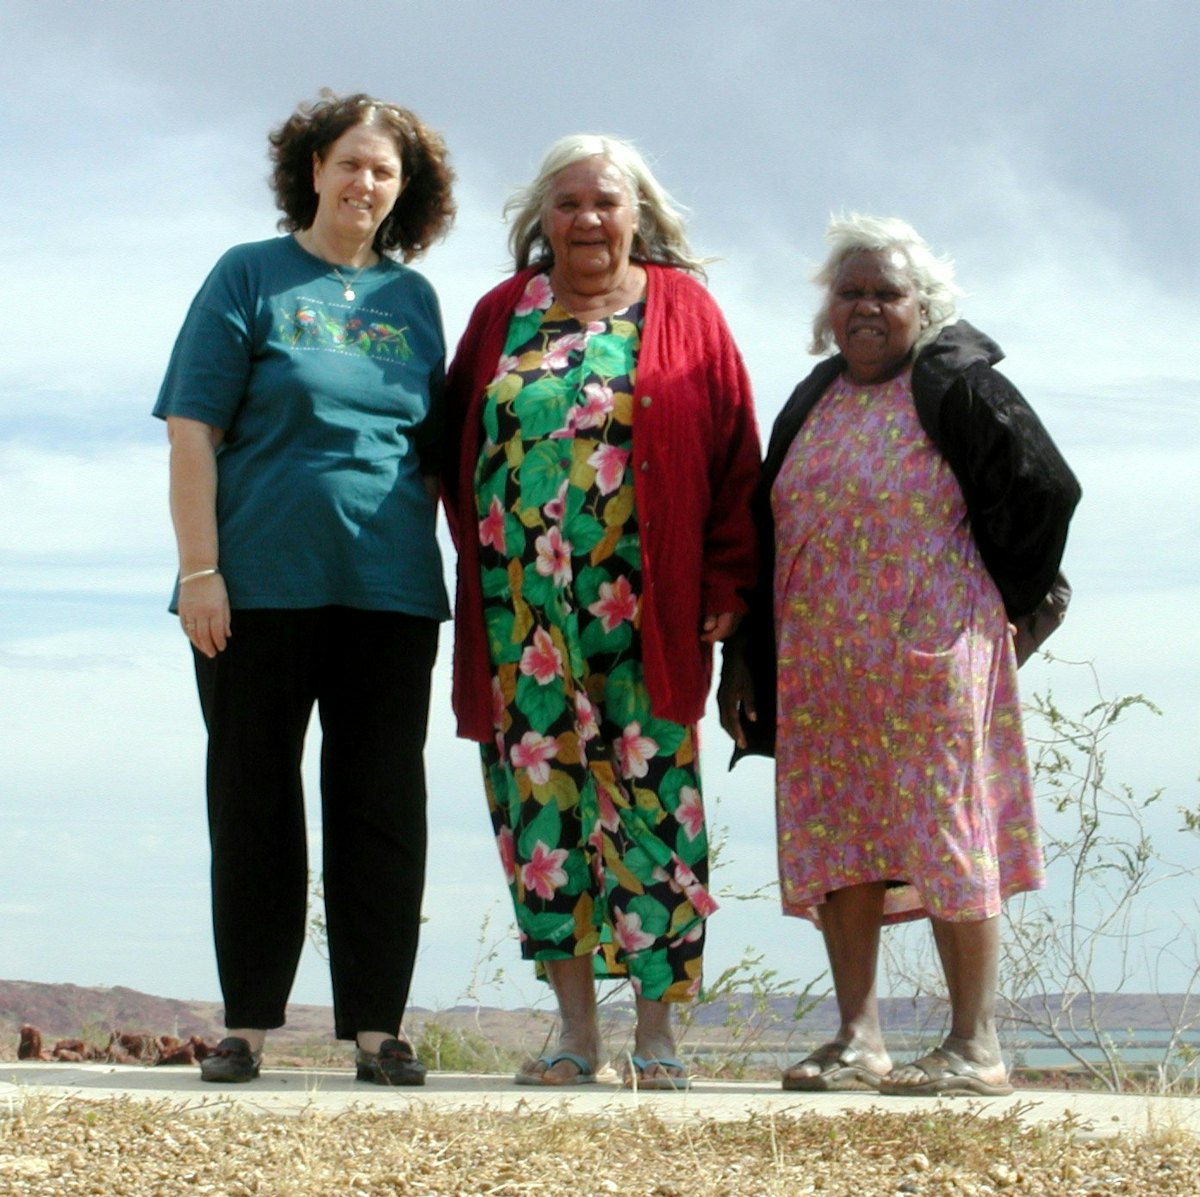 Among the hundreds of face-to-face study circles in Australia is an indigenous one in Western Australia. Pictured (left to right) are three of its members: Shona Earnest, Joyce Injie, and Tadgee Limerick.